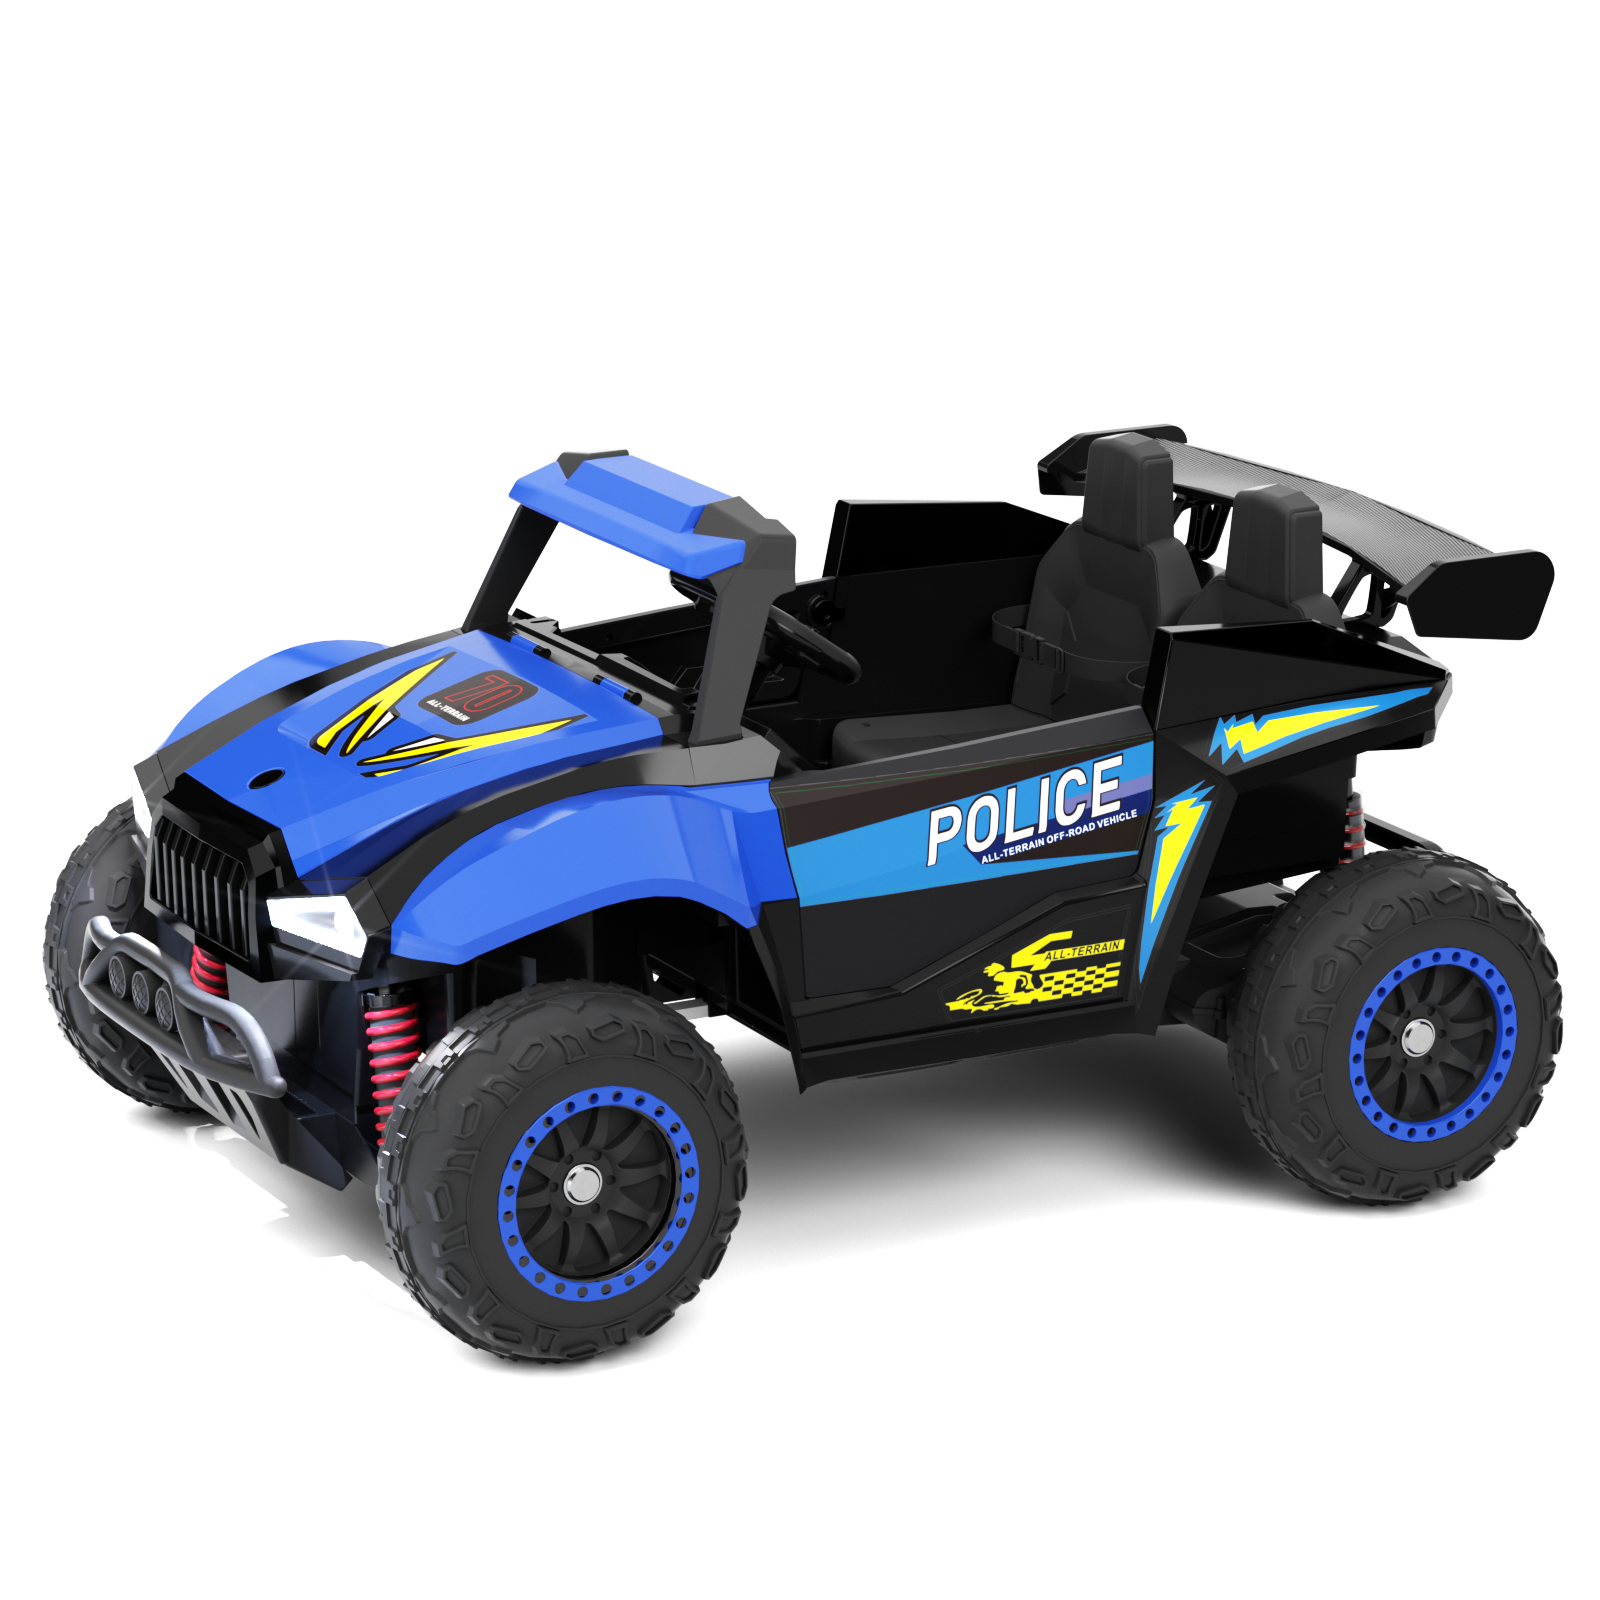 XJD 12V/24V 7AH Ride On Car with Remote Control, 2WD/4WD Switchable, 2 Seats, Power Car for Kids, Blue&Green